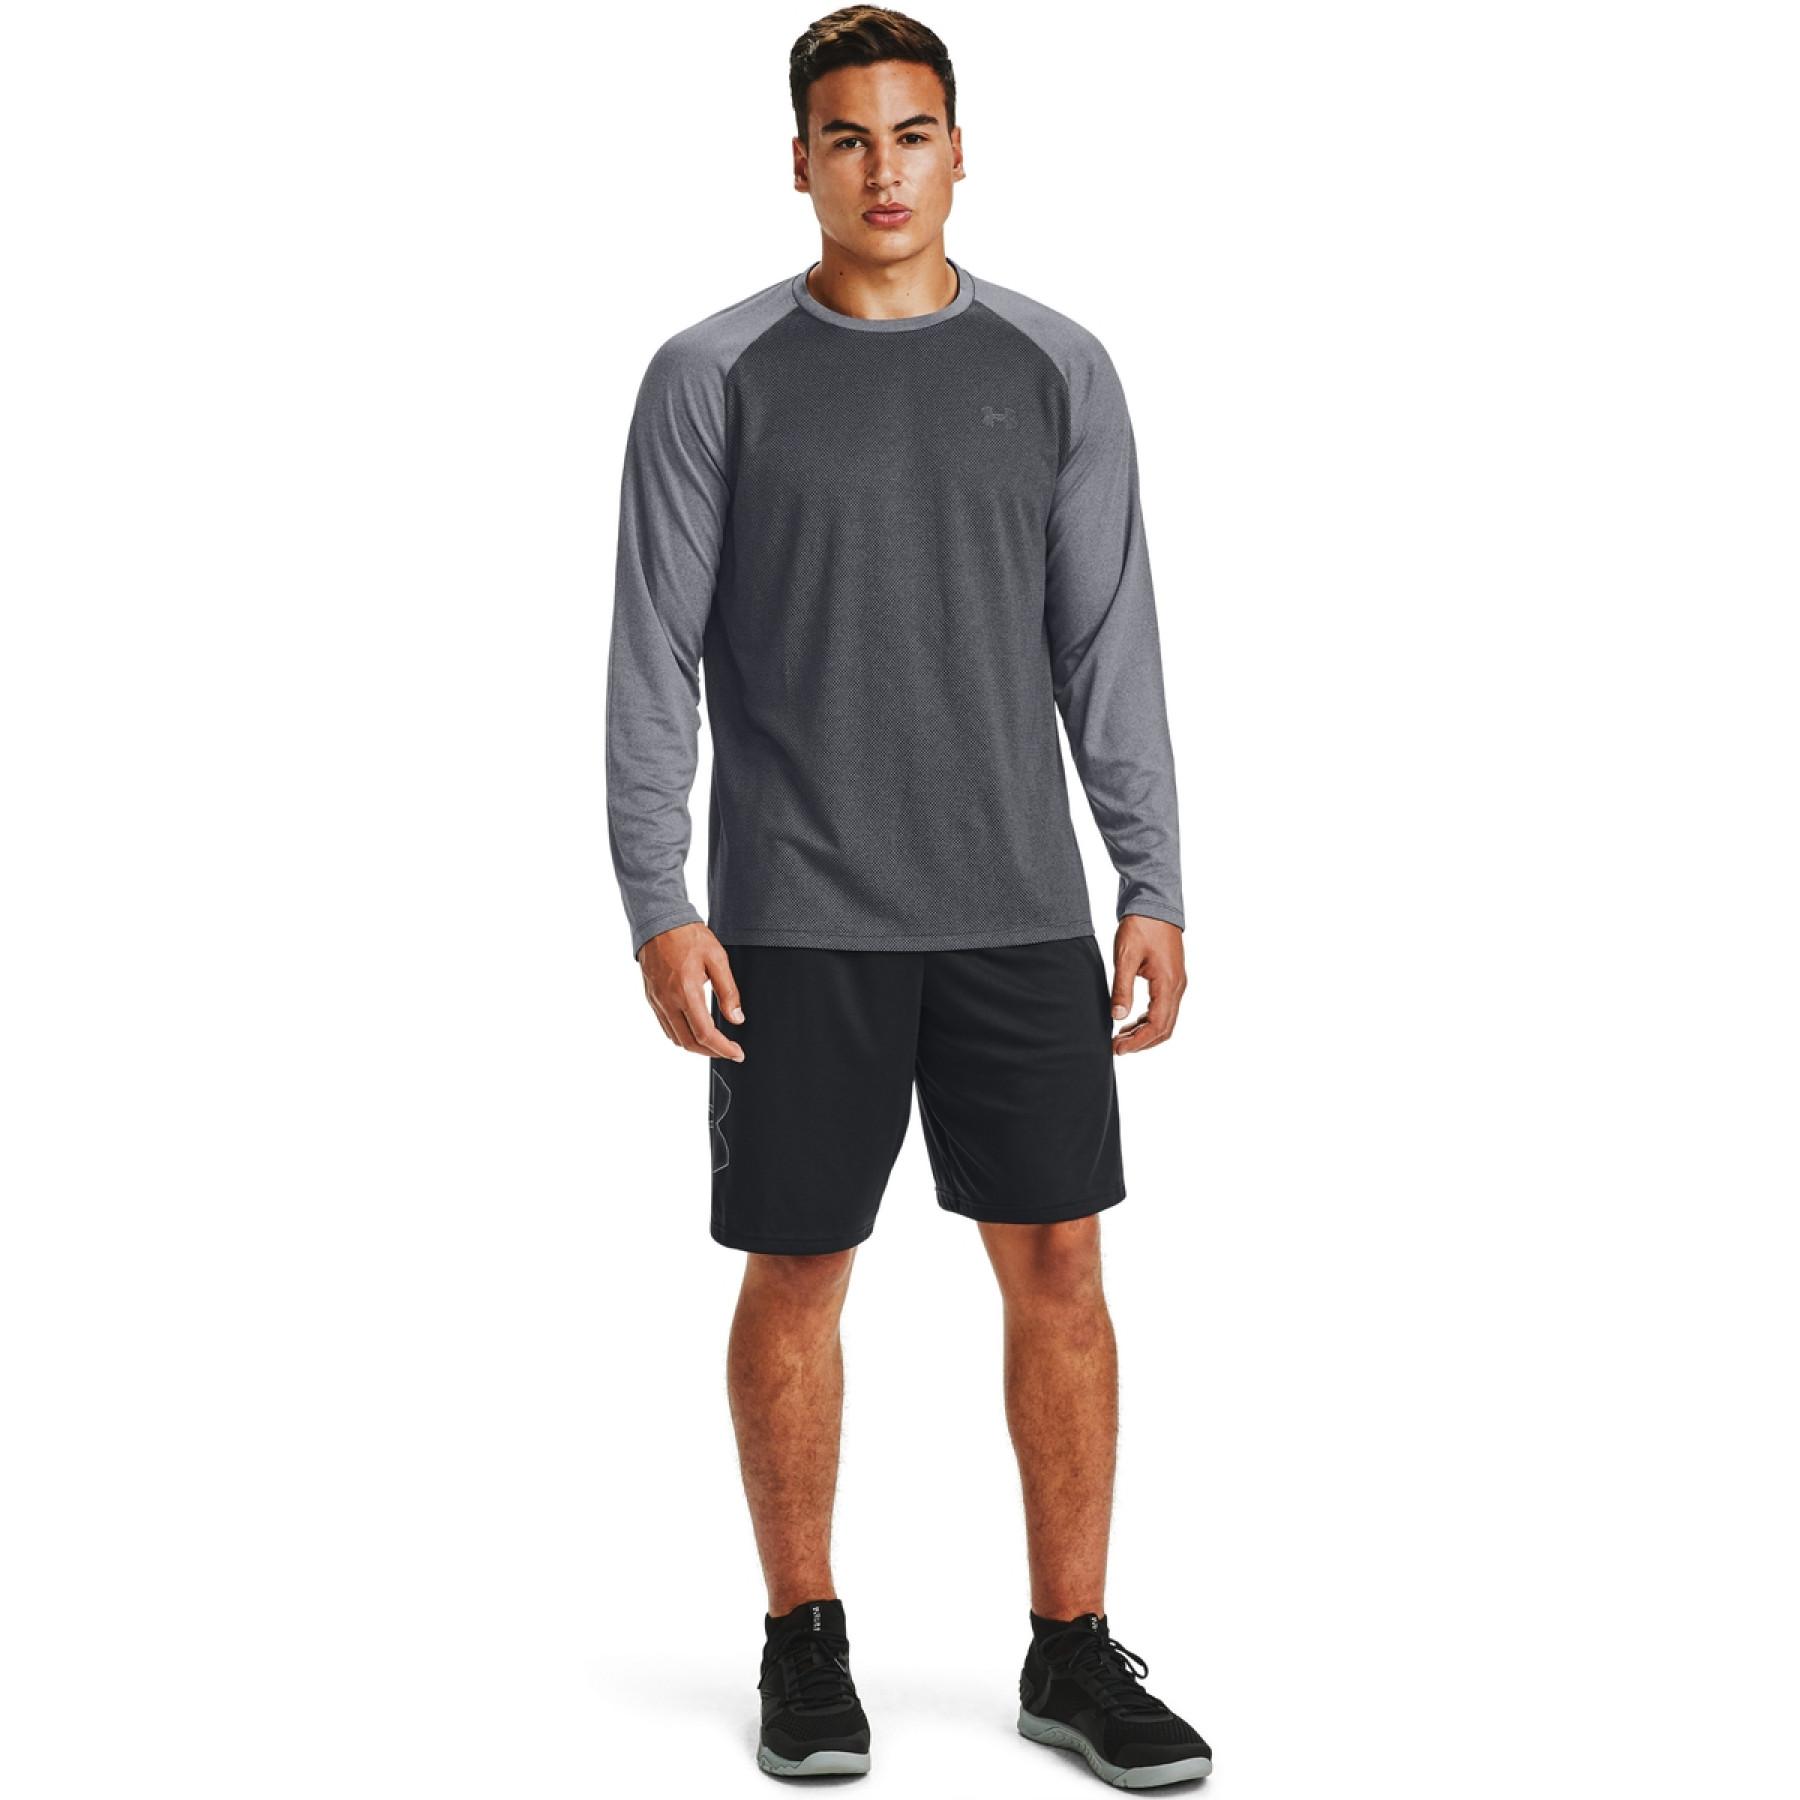 Jersey Under Armour à manches longues textured